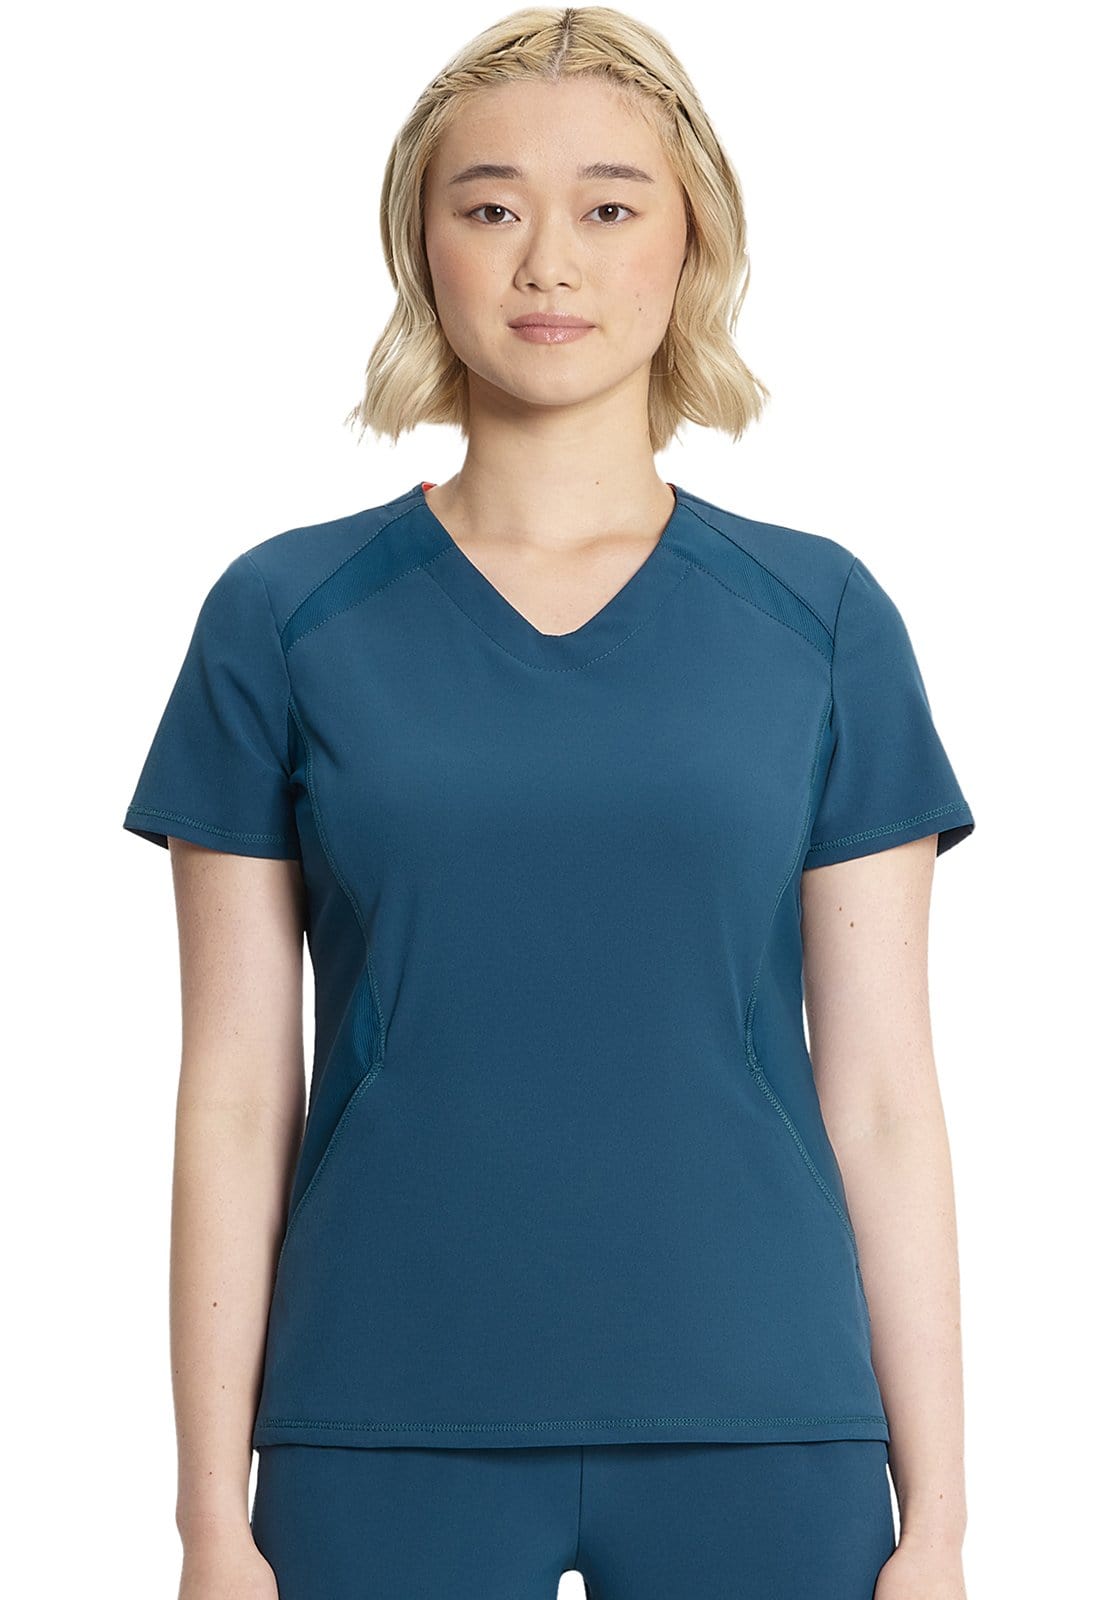 Infinity Infinity GNR8 Caribbean Blue / 2XL Infinity GNR8  V-neck Top IN620A